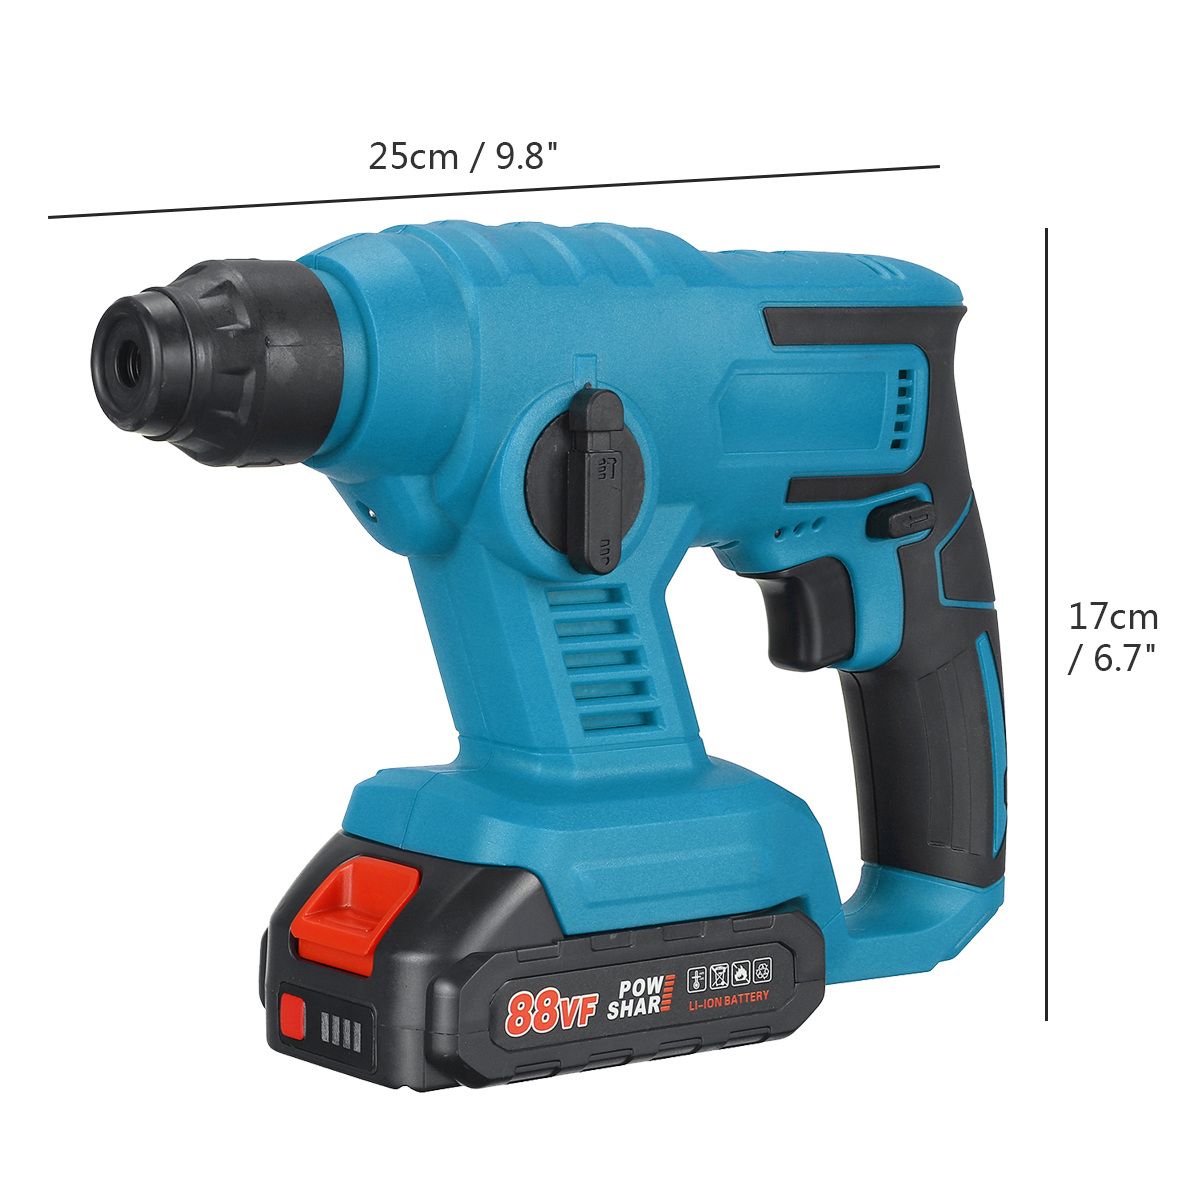 88VF-1800rpm-Cordless-Brushless-Rotary-Hammer-Drill-Fit-18VMakita-Battery-1943502-4